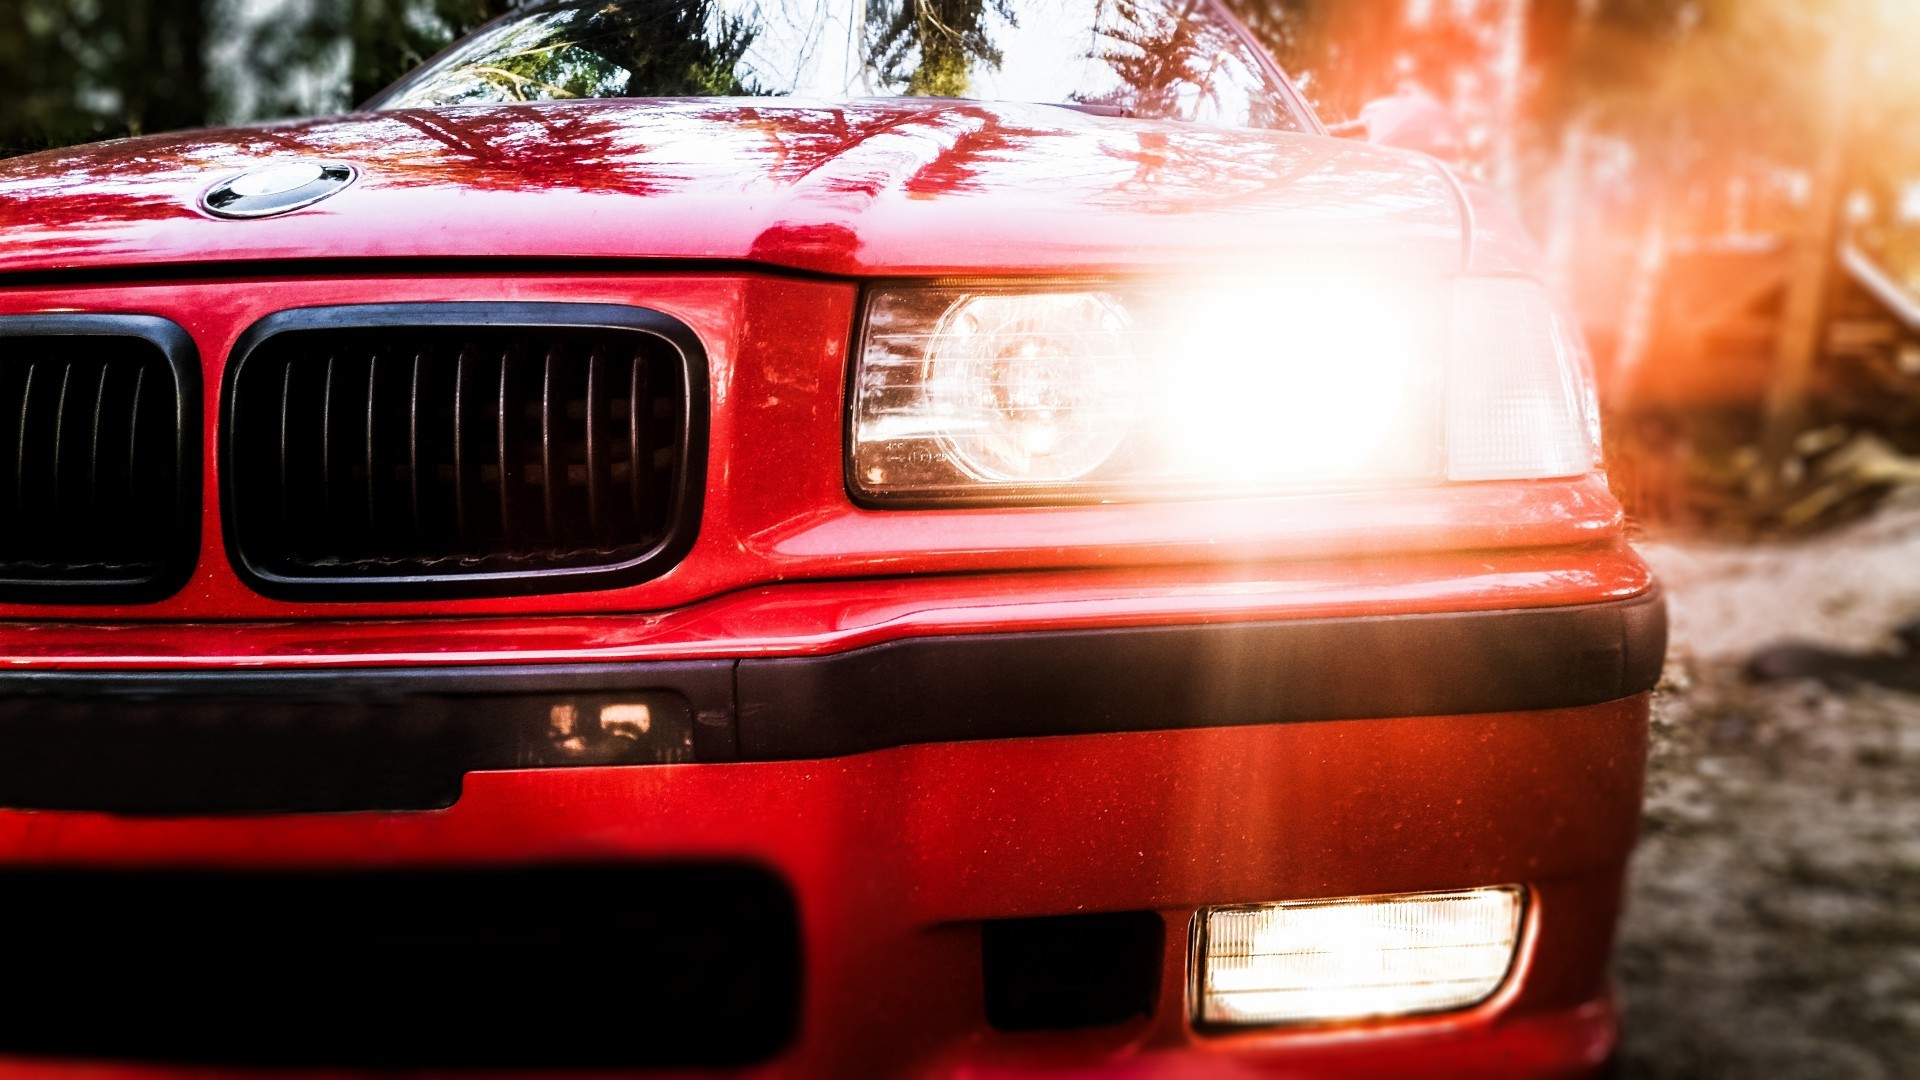 1920x1080 Bmw E36, Red, Front View, Cars